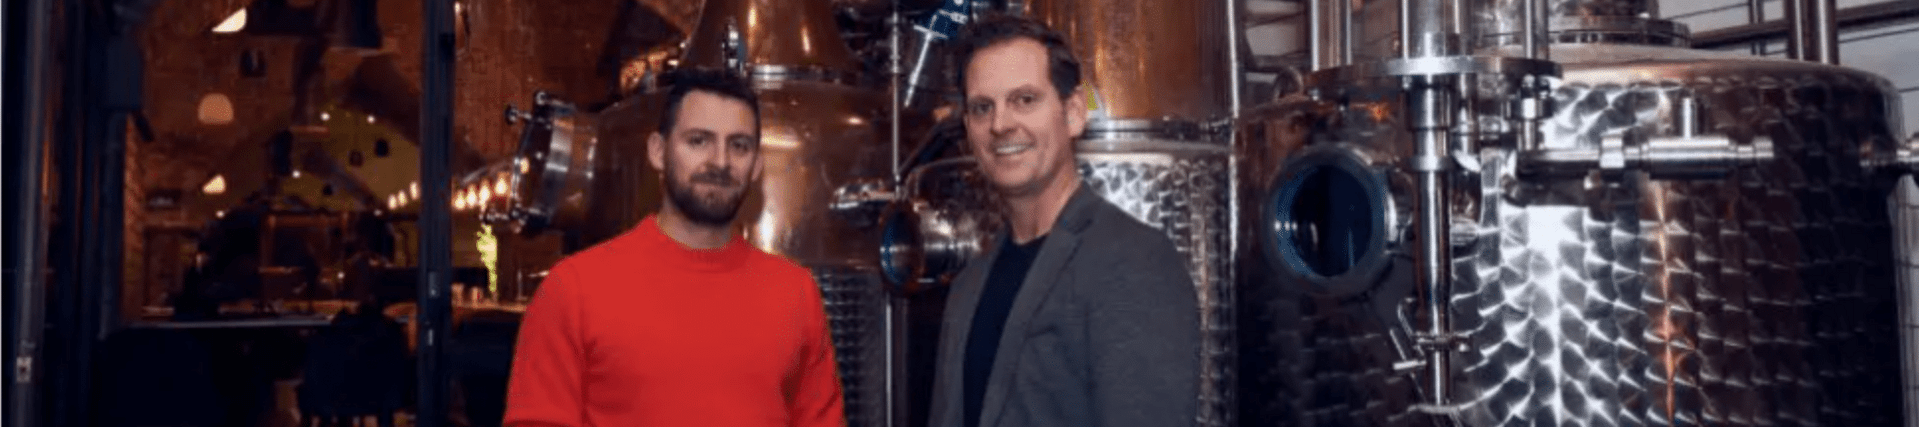 Seb Heeley and Adrian Adair at the Manchester Gin Distillery